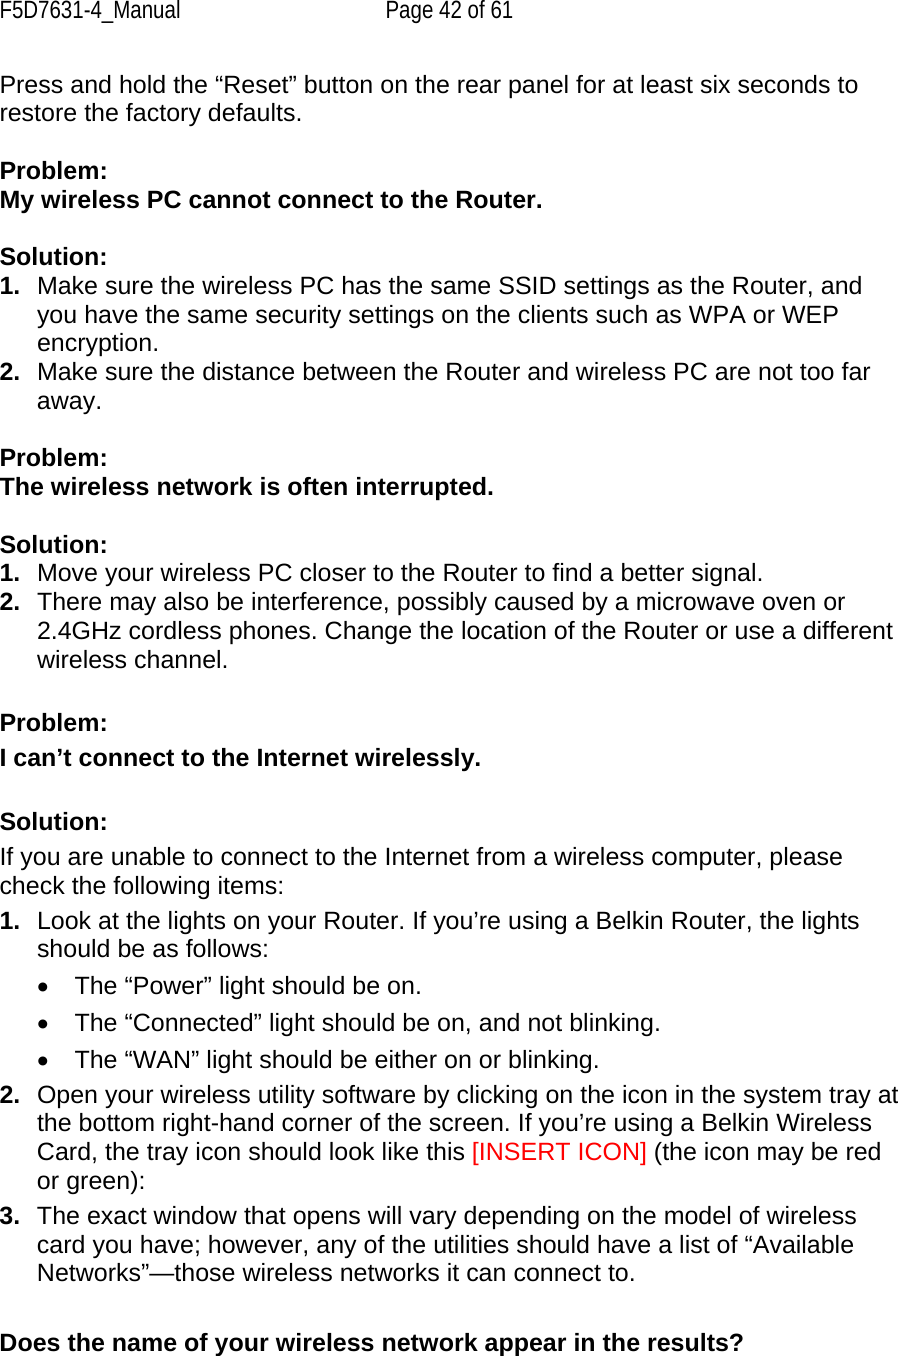 F5D7631-4_Manual  Page 42 of 61 Press and hold the “Reset” button on the rear panel for at least six seconds to restore the factory defaults.  Problem: My wireless PC cannot connect to the Router.   Solution:  1.  Make sure the wireless PC has the same SSID settings as the Router, and you have the same security settings on the clients such as WPA or WEP encryption. 2.  Make sure the distance between the Router and wireless PC are not too far away.  Problem: The wireless network is often interrupted.  Solution: 1.  Move your wireless PC closer to the Router to find a better signal. 2.  There may also be interference, possibly caused by a microwave oven or 2.4GHz cordless phones. Change the location of the Router or use a different wireless channel.  Problem: I can’t connect to the Internet wirelessly.  Solution: If you are unable to connect to the Internet from a wireless computer, please check the following items: 1.  Look at the lights on your Router. If you’re using a Belkin Router, the lights should be as follows:  •  The “Power” light should be on.  •  The “Connected” light should be on, and not blinking.  •  The “WAN” light should be either on or blinking. 2.  Open your wireless utility software by clicking on the icon in the system tray at the bottom right-hand corner of the screen. If you’re using a Belkin Wireless Card, the tray icon should look like this [INSERT ICON] (the icon may be red or green): 3.  The exact window that opens will vary depending on the model of wireless card you have; however, any of the utilities should have a list of “Available Networks”—those wireless networks it can connect to.   Does the name of your wireless network appear in the results?  